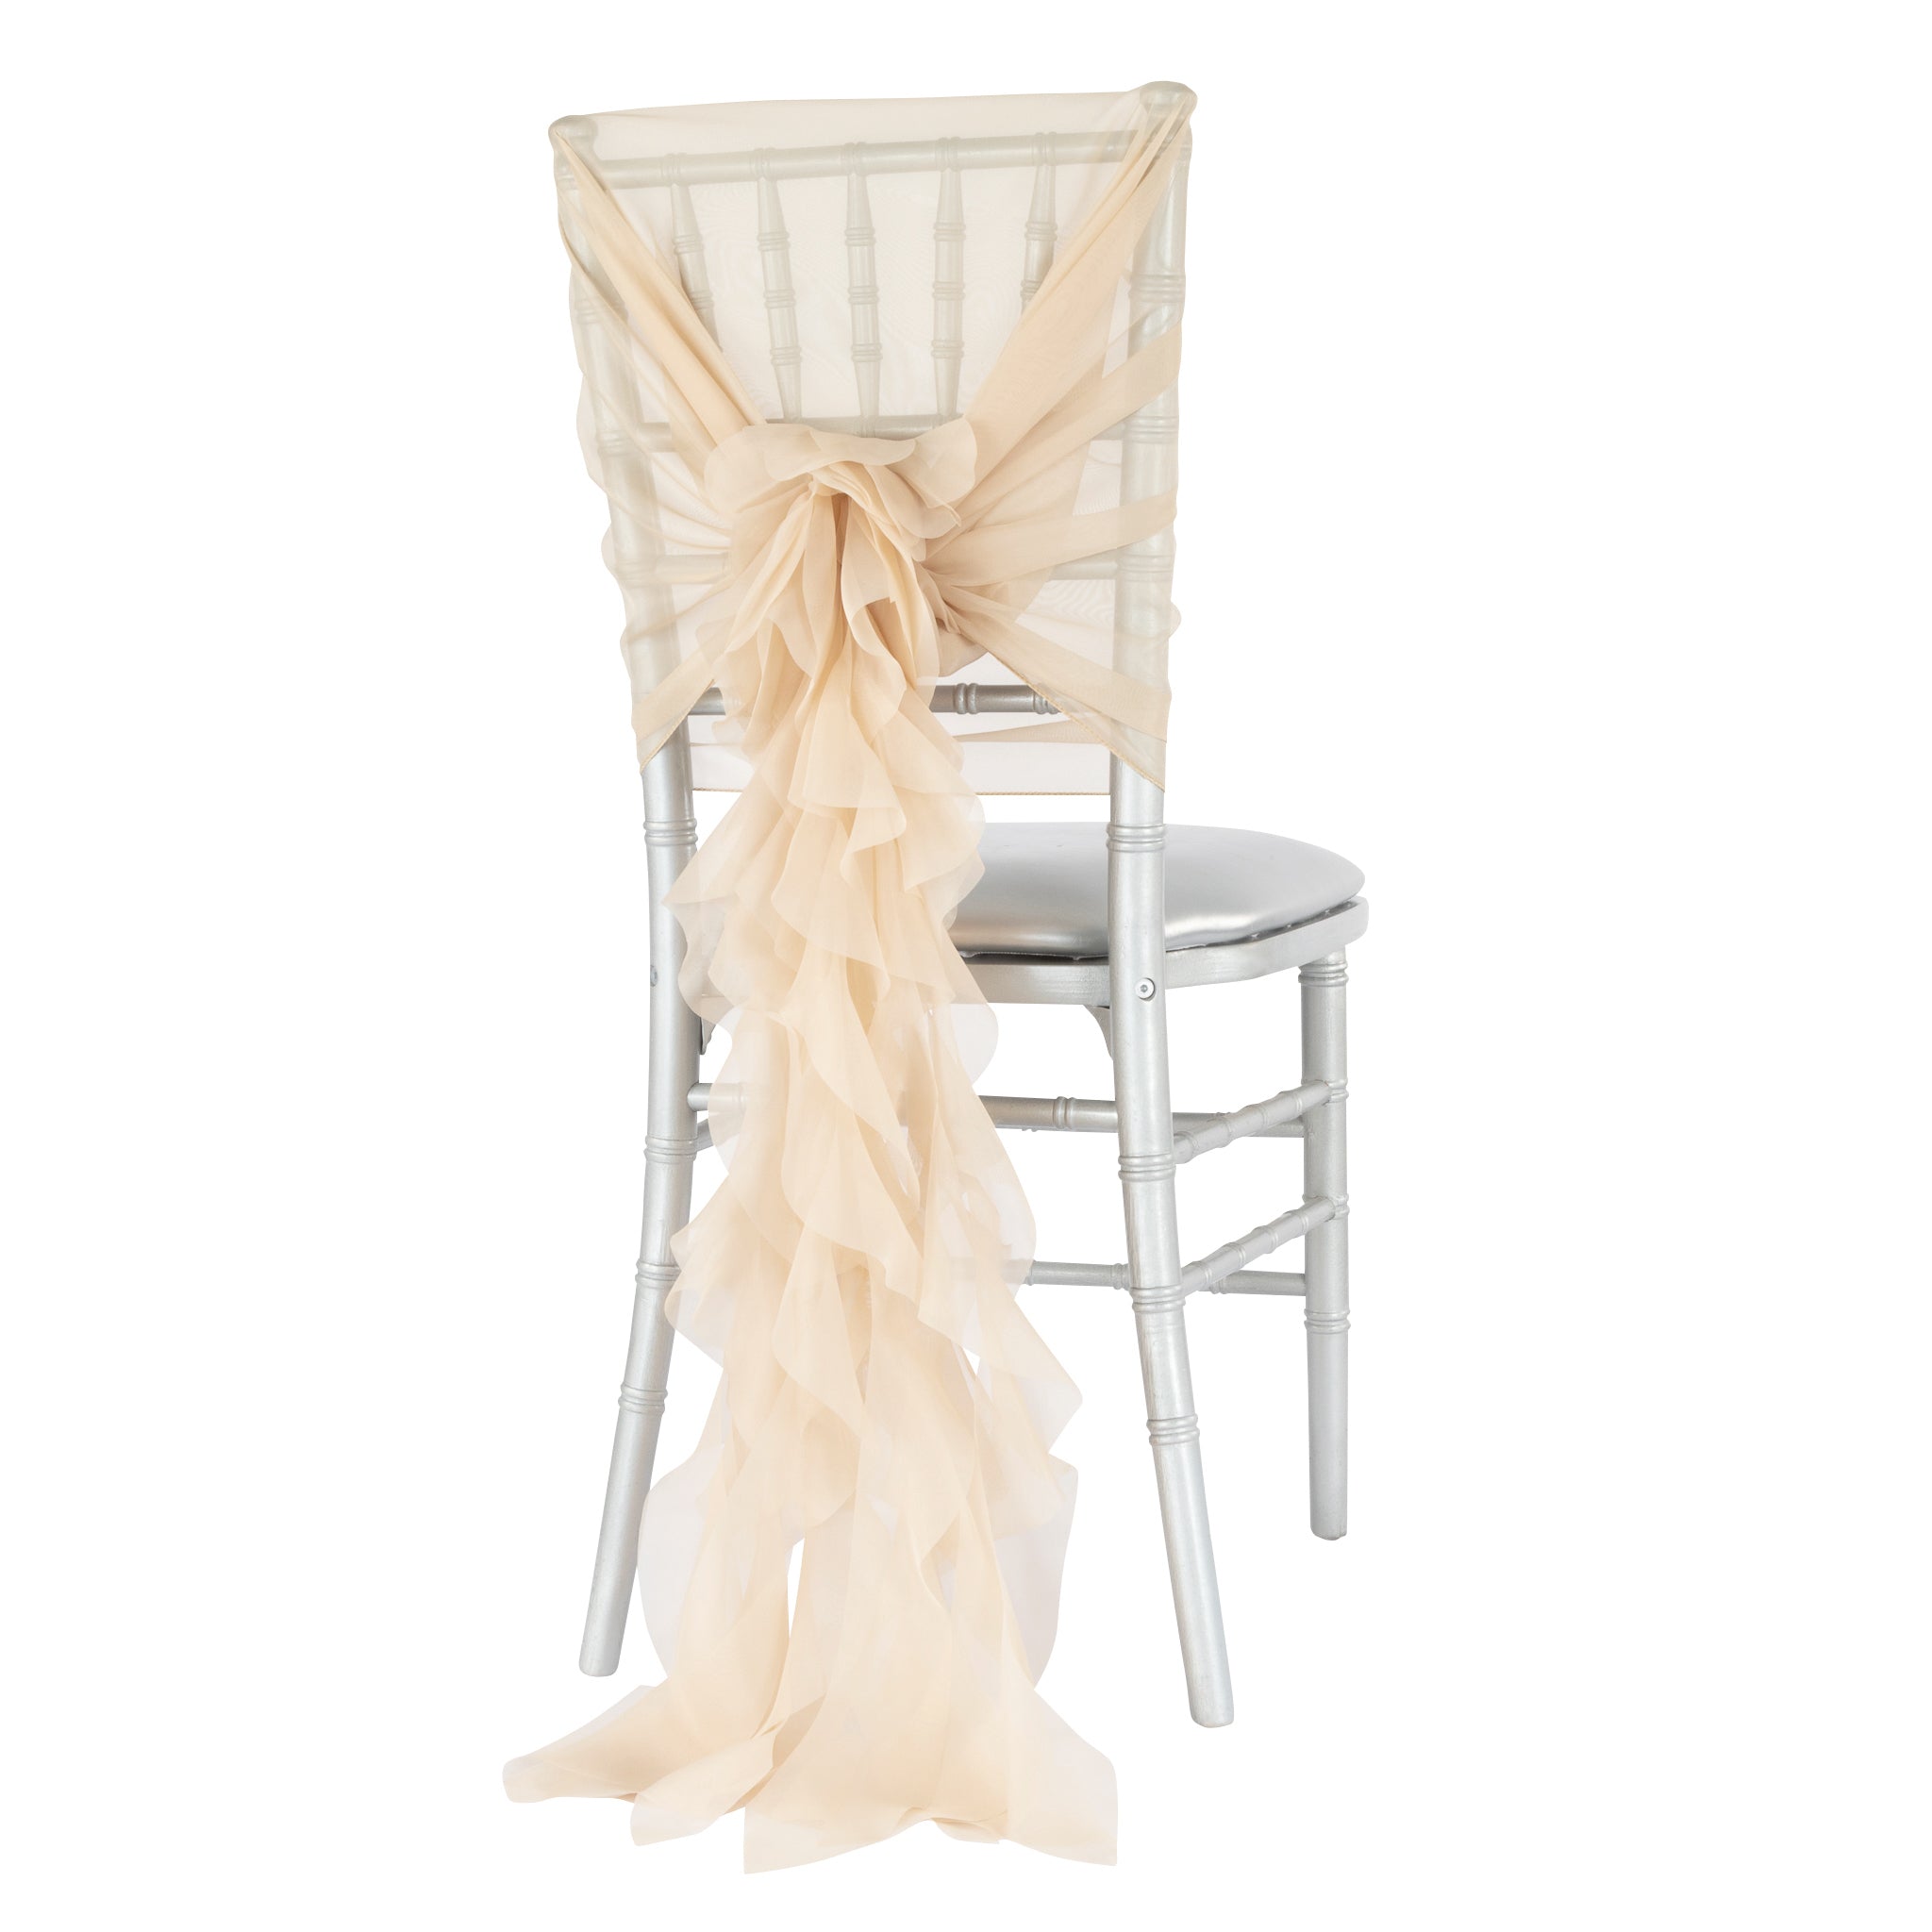 1 Set of Soft Curly Willow Ruffles Chair Sash & Cap - Champagne